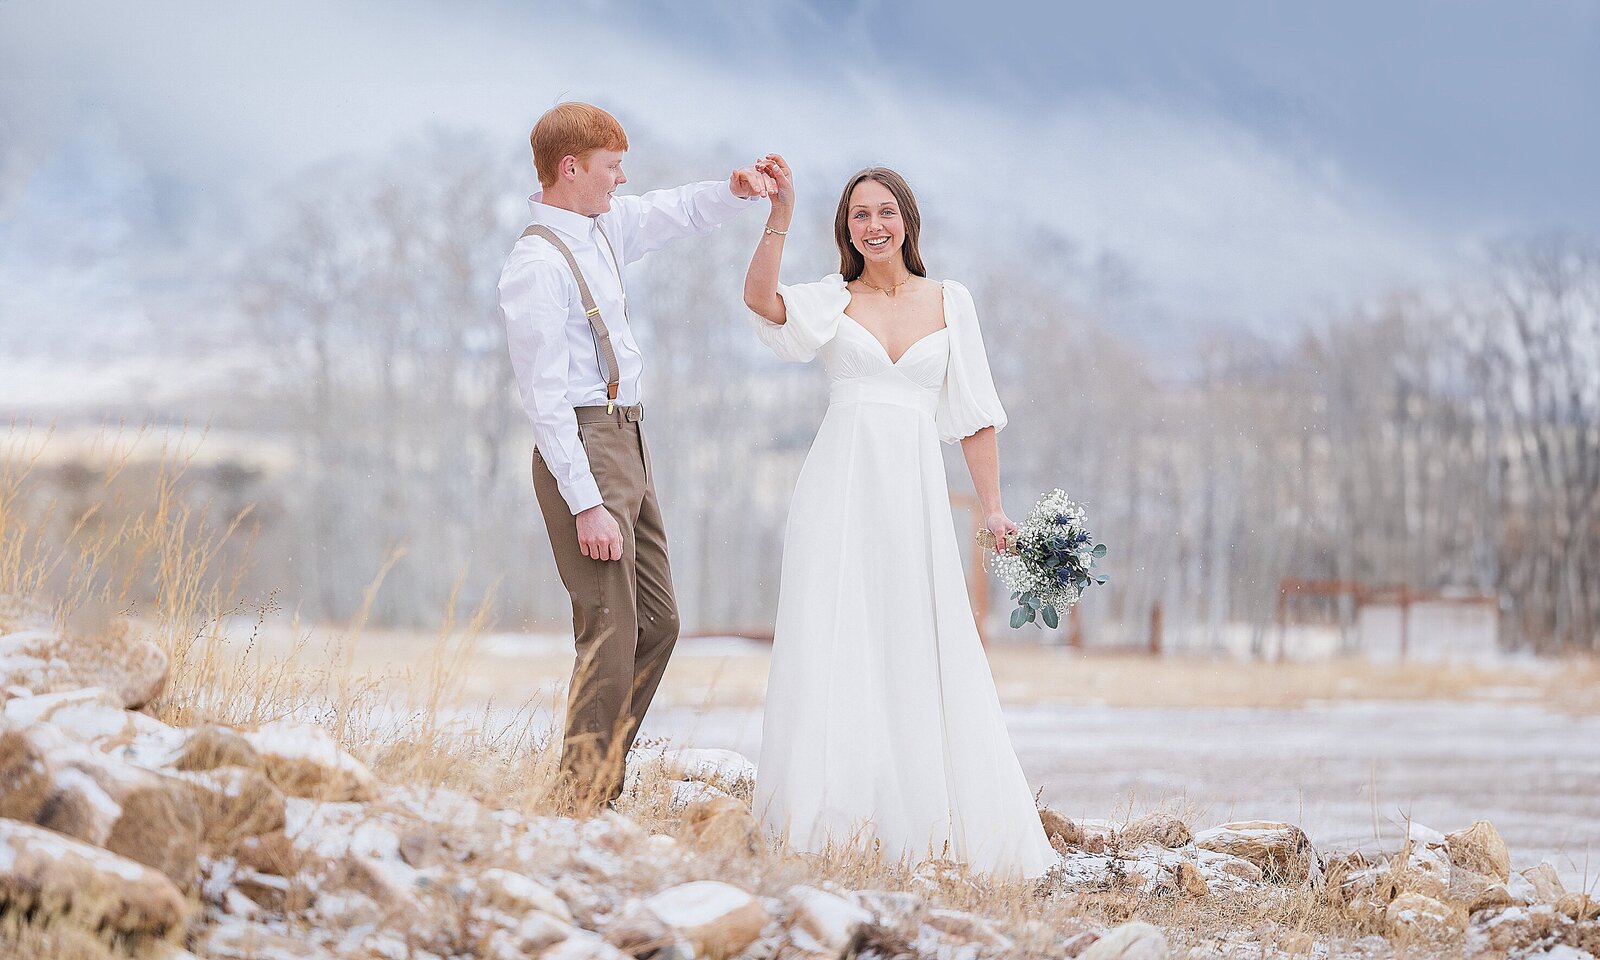 Bride and groom in a magical  winter setting